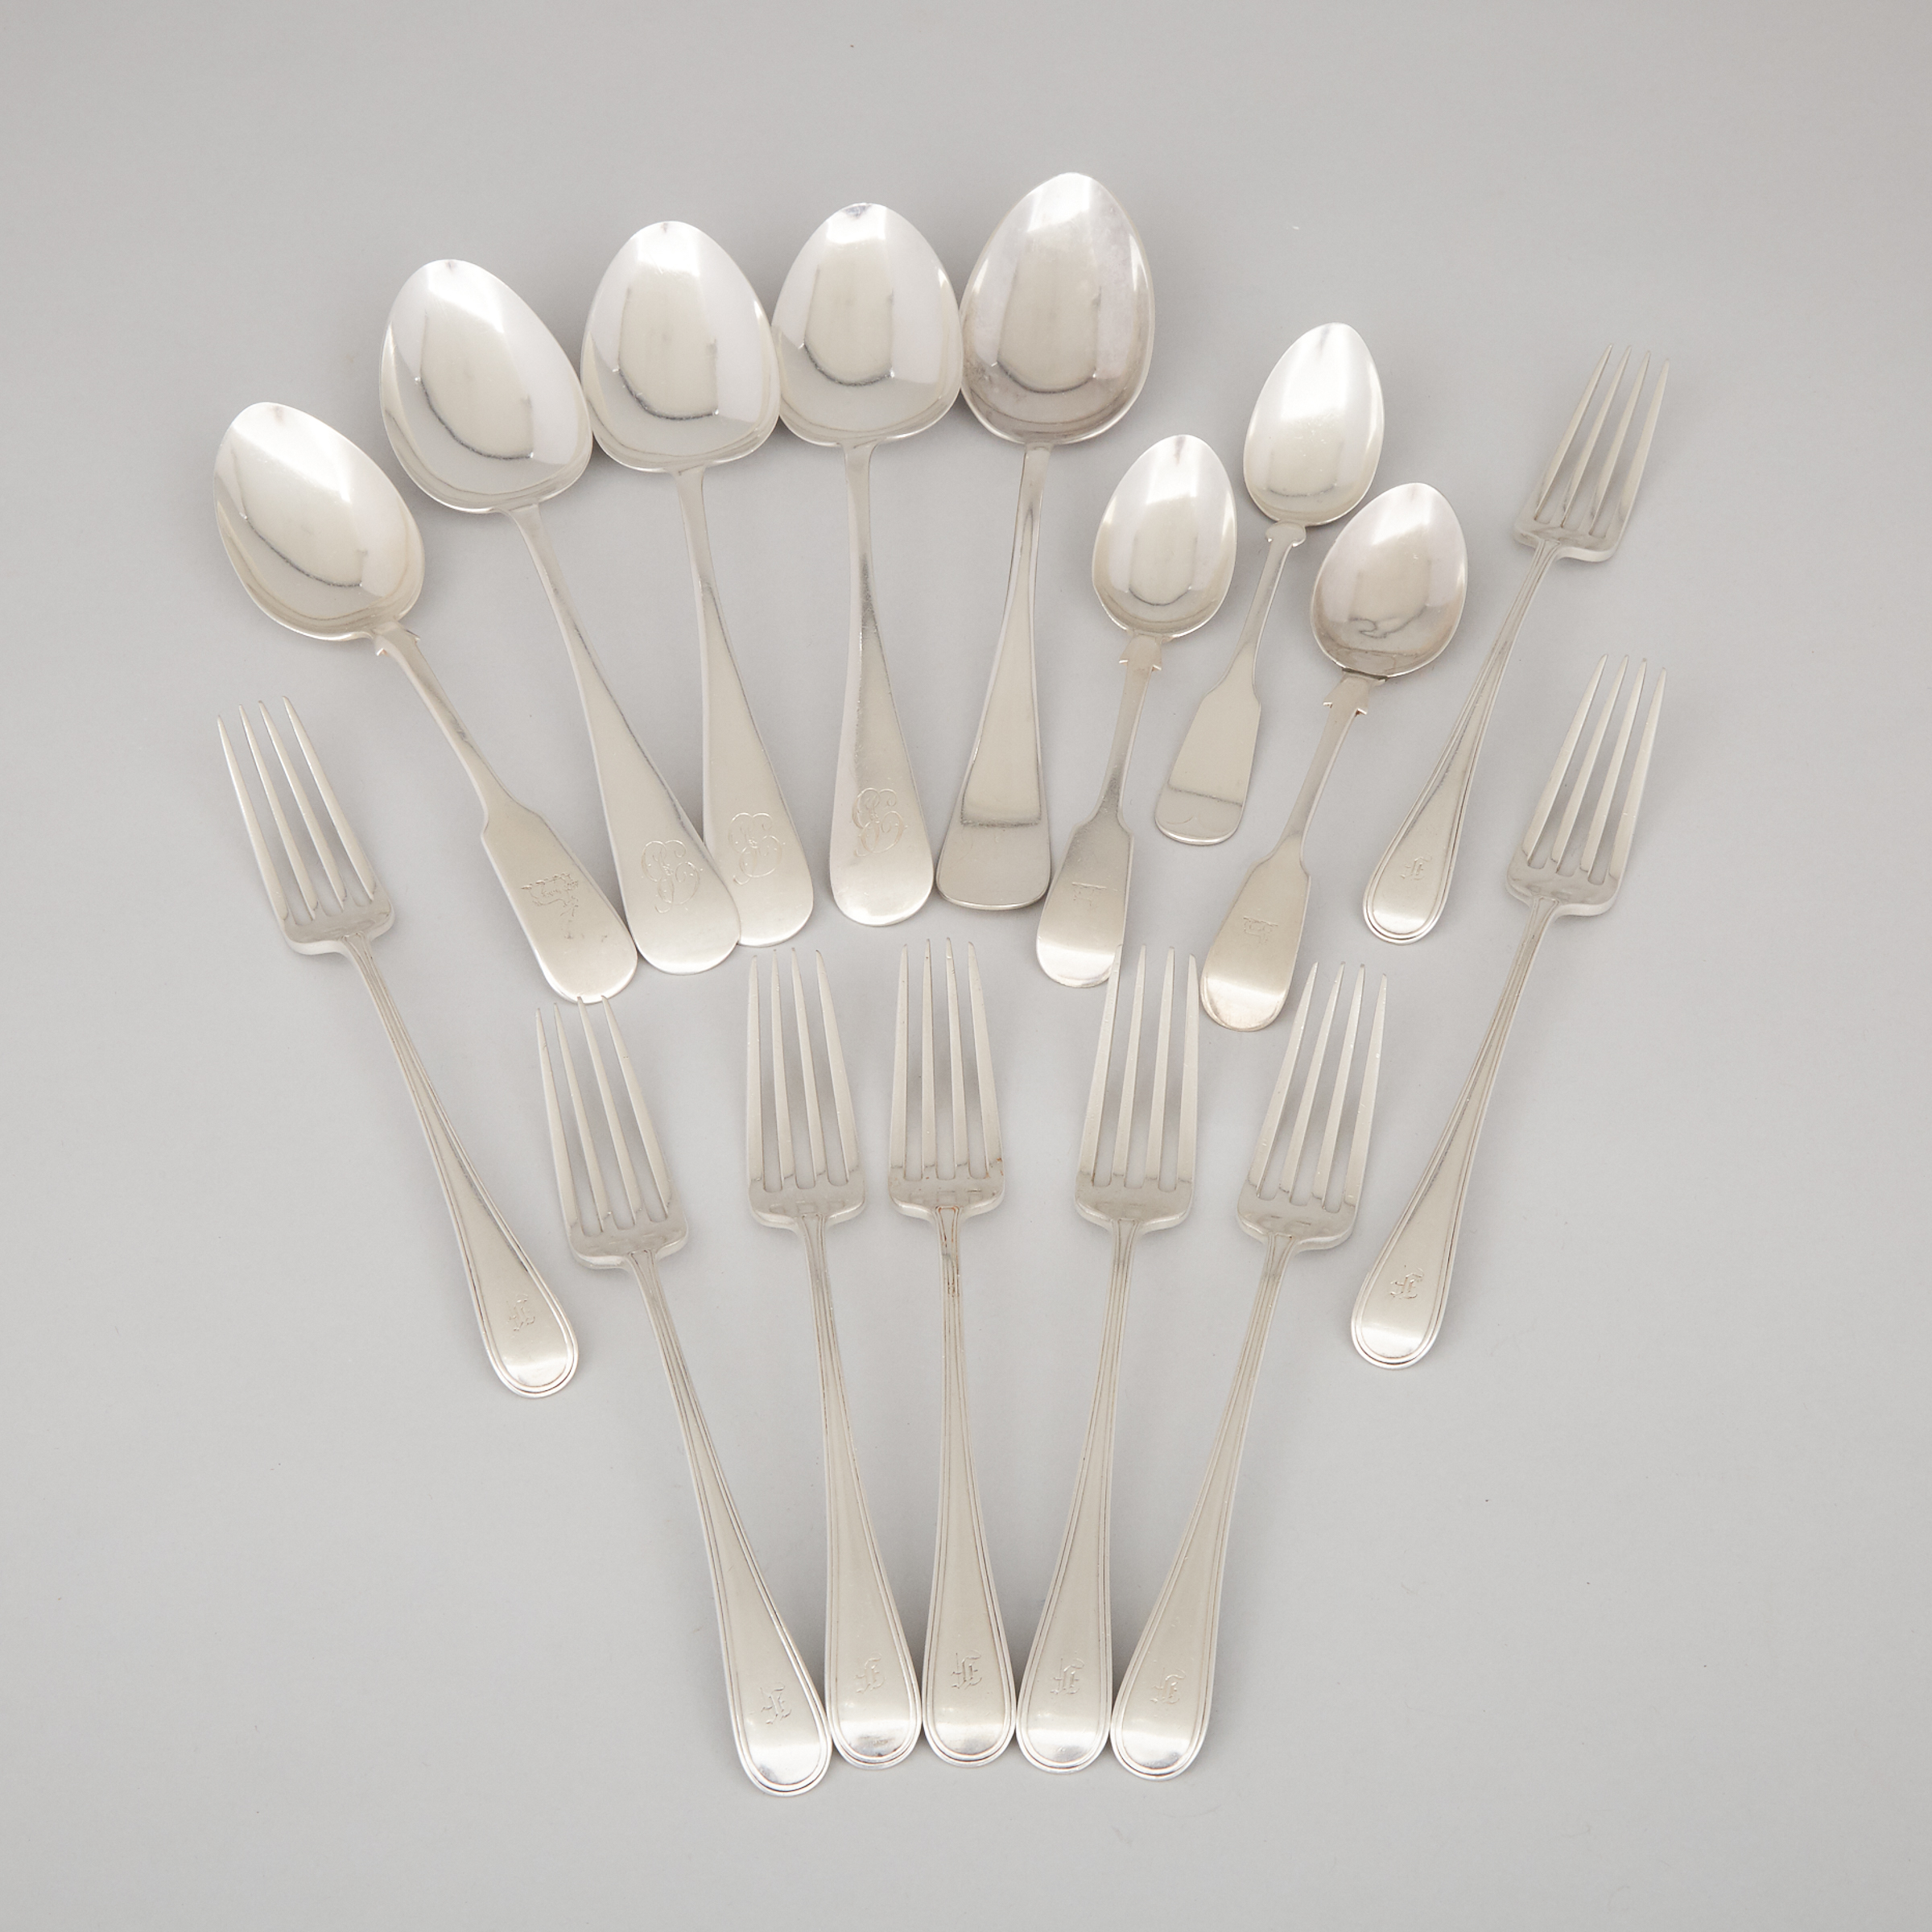 Group of Canadian Silver Flatware, Ryrie Bros., J.E. Ellis & Co., and Roden Bros., Toronto, Ont., 19th century